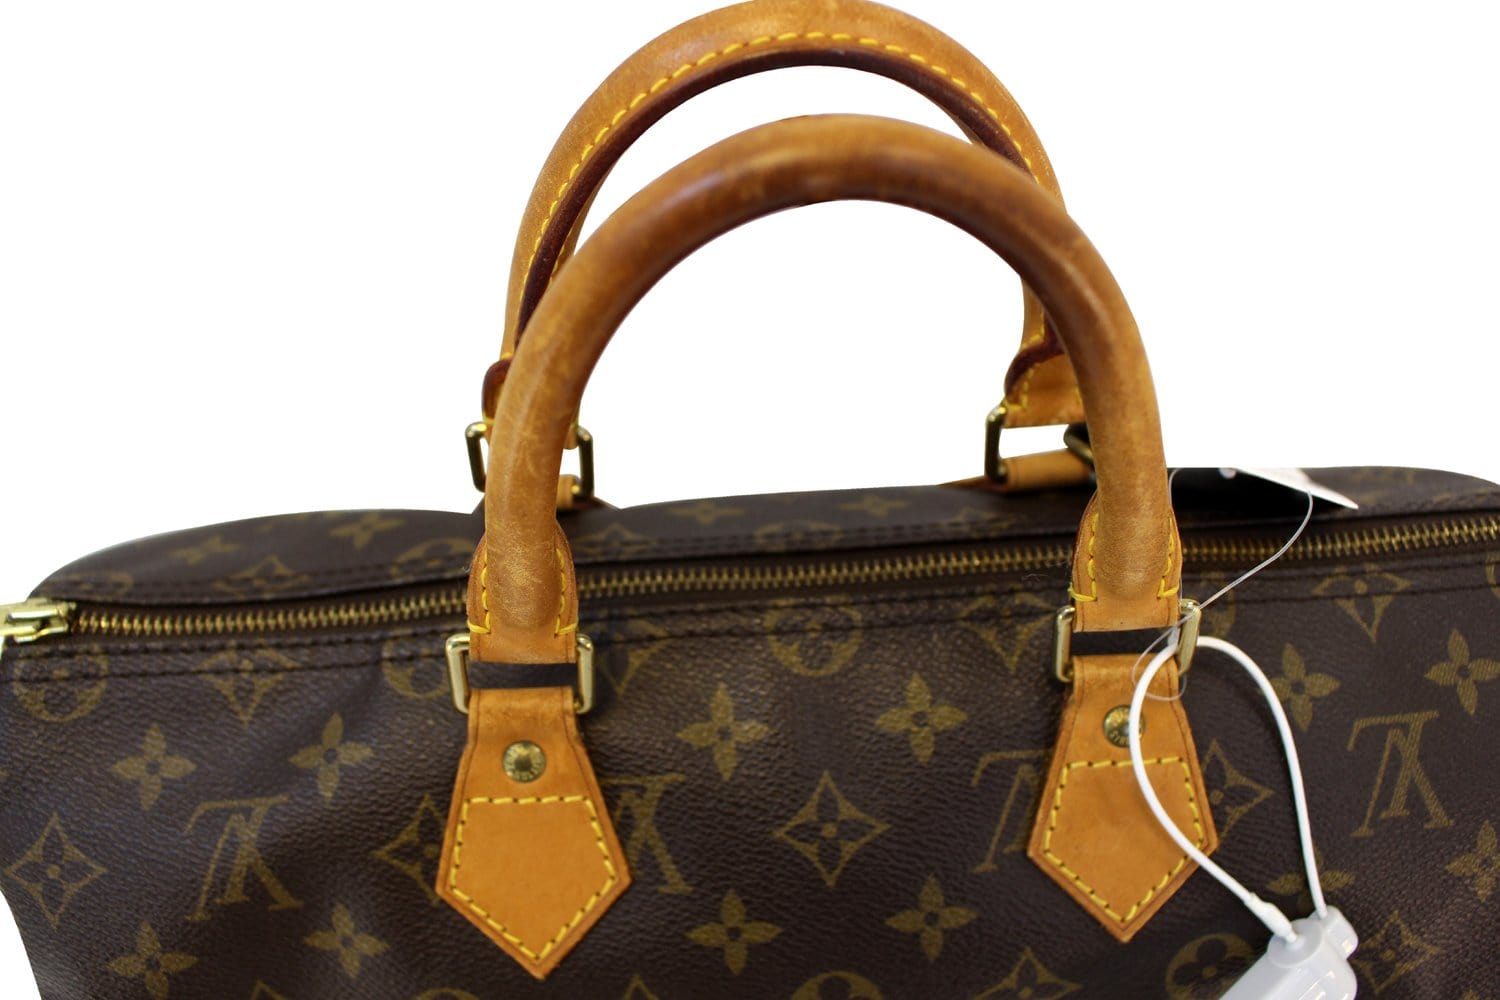 Speedy 35 - Louis Vuitton  Speedy 35 - Louis Vuitton by Lola Collective  Bags